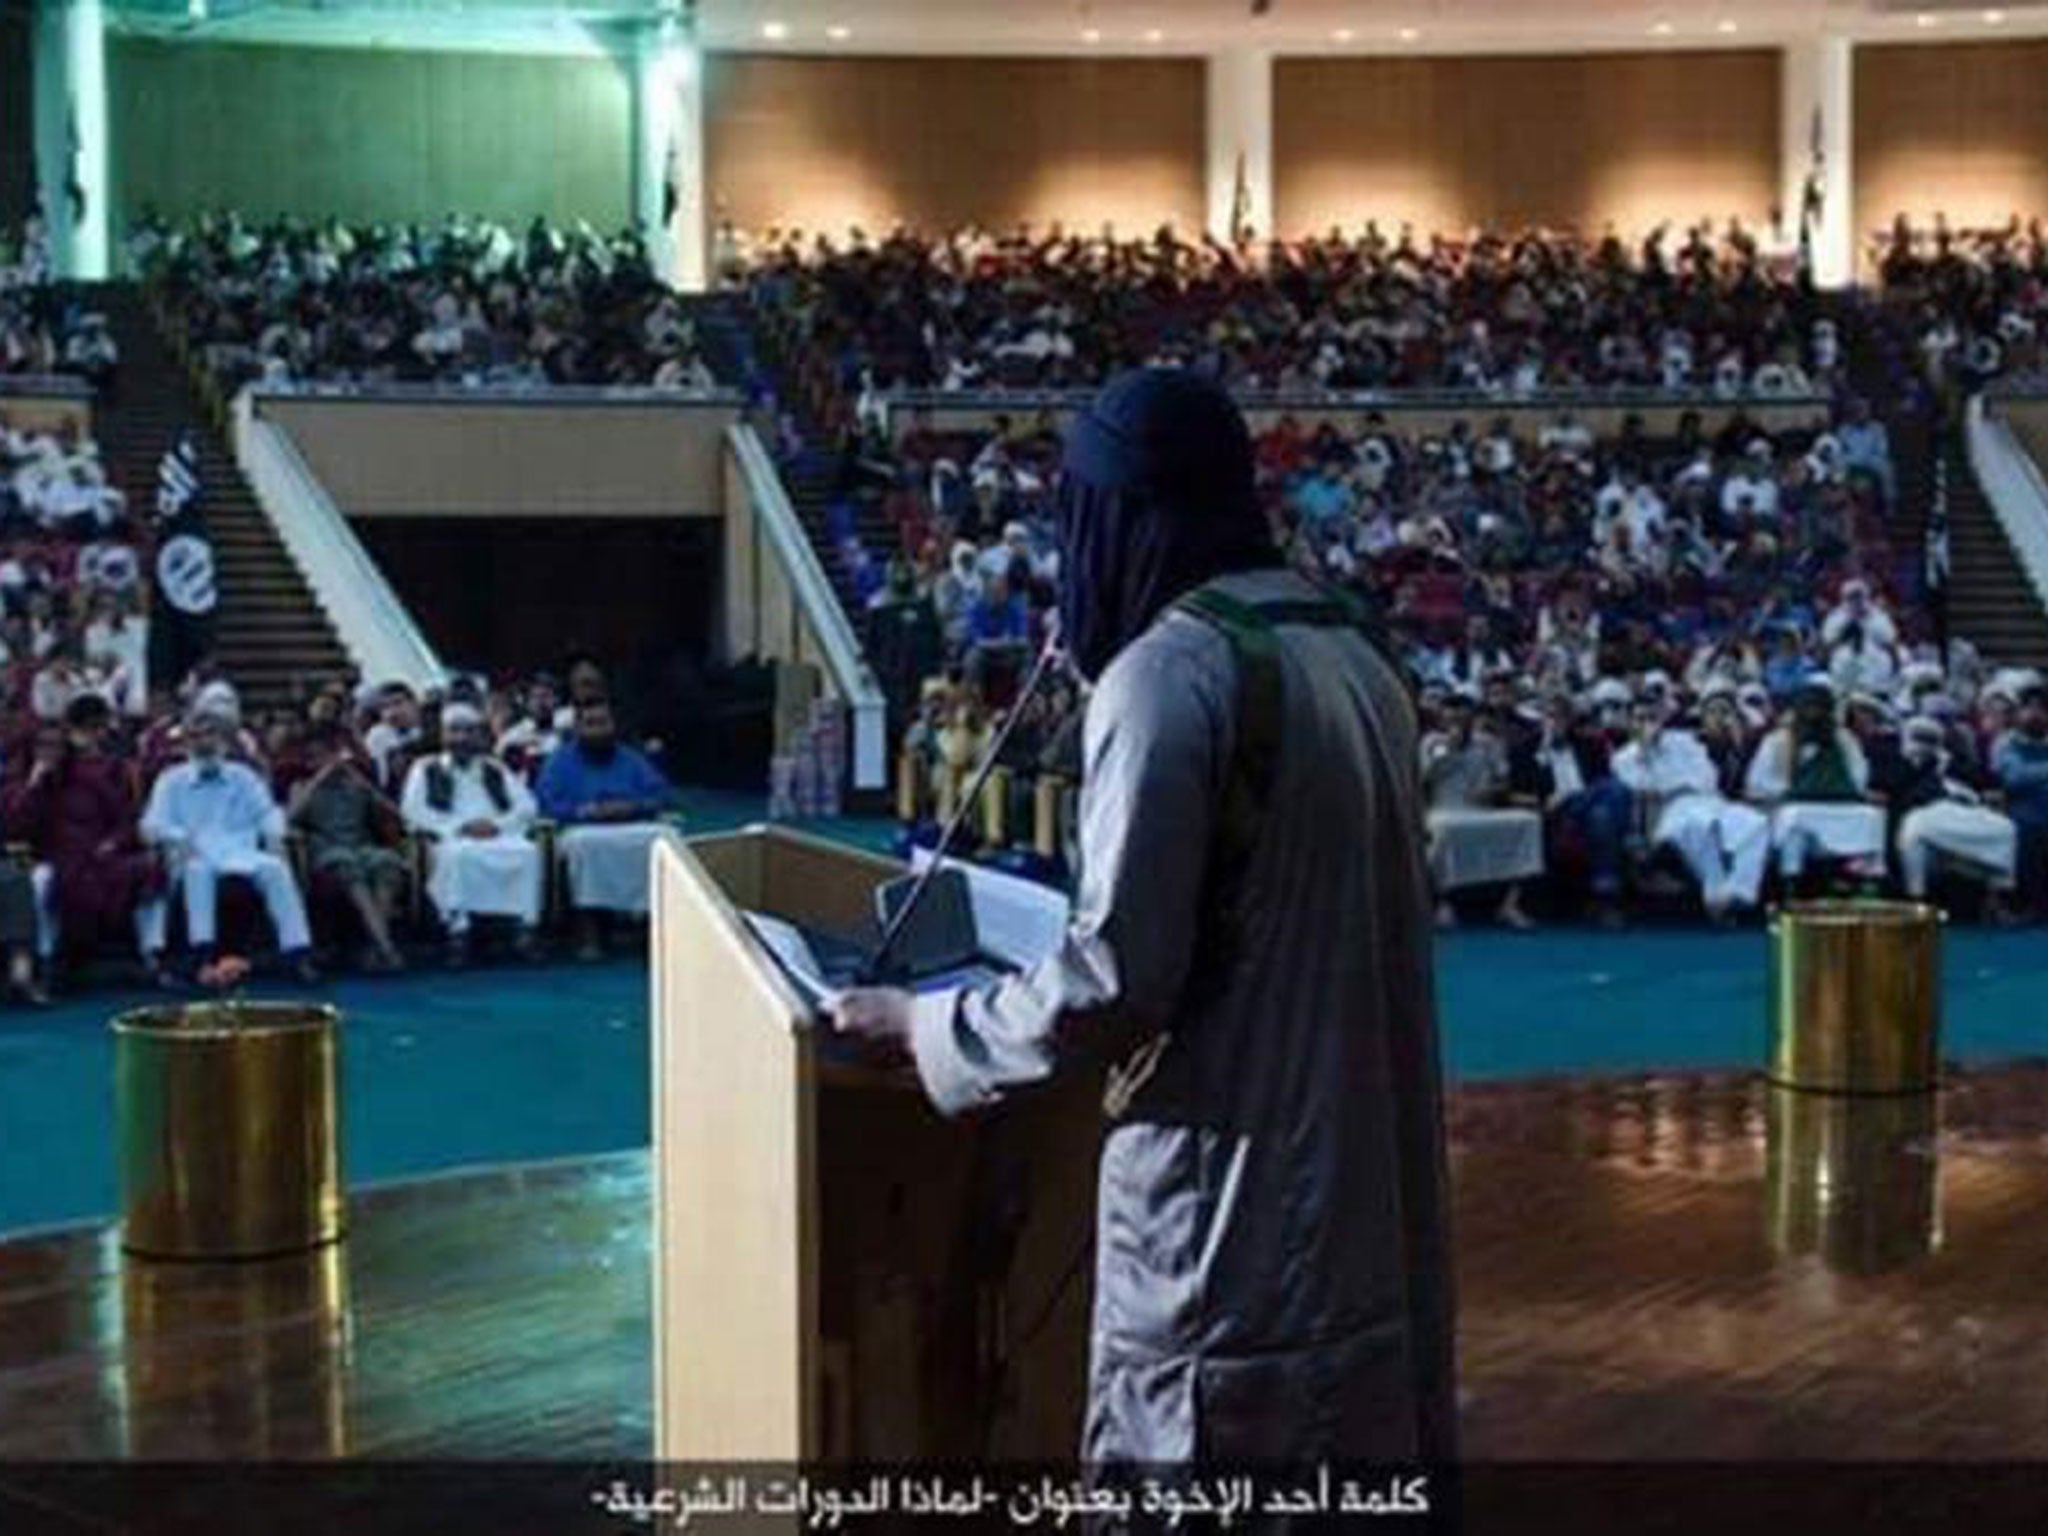 An Isis lecture on Sharia at the Ouagadougou complex in Sirte, Libya, in 2016.